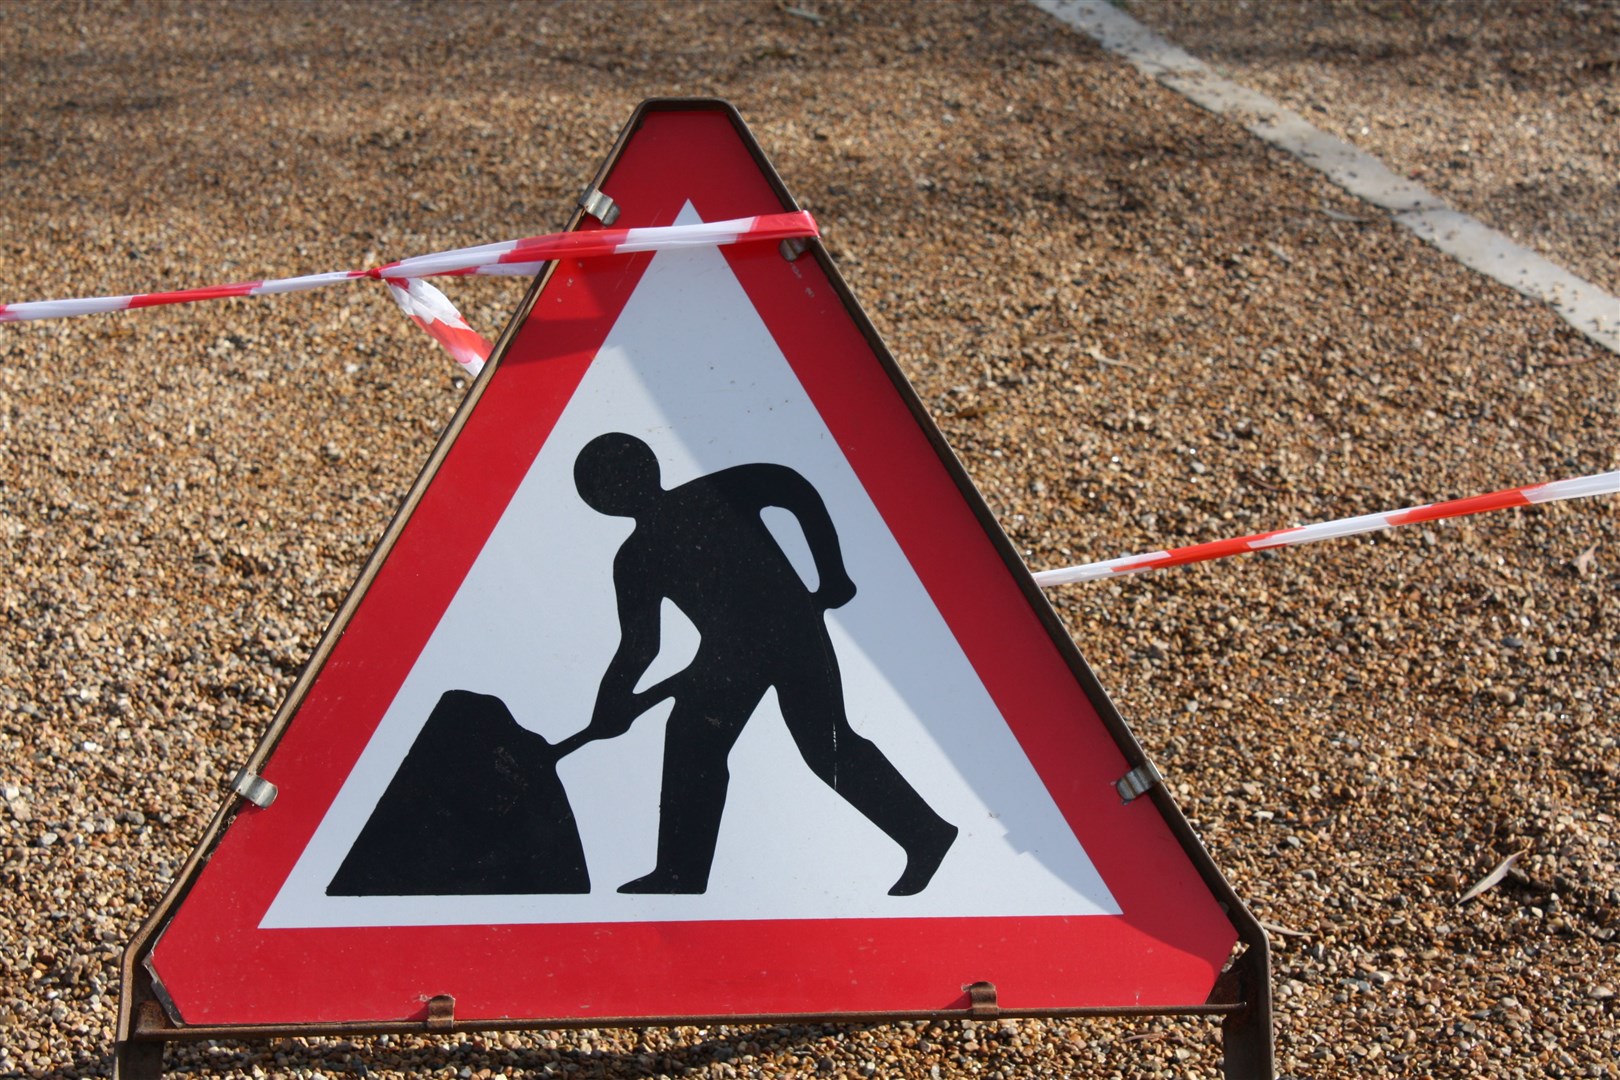 Roadworks are due to start on the Aviemore-Keith road by Broomhill from Monday.